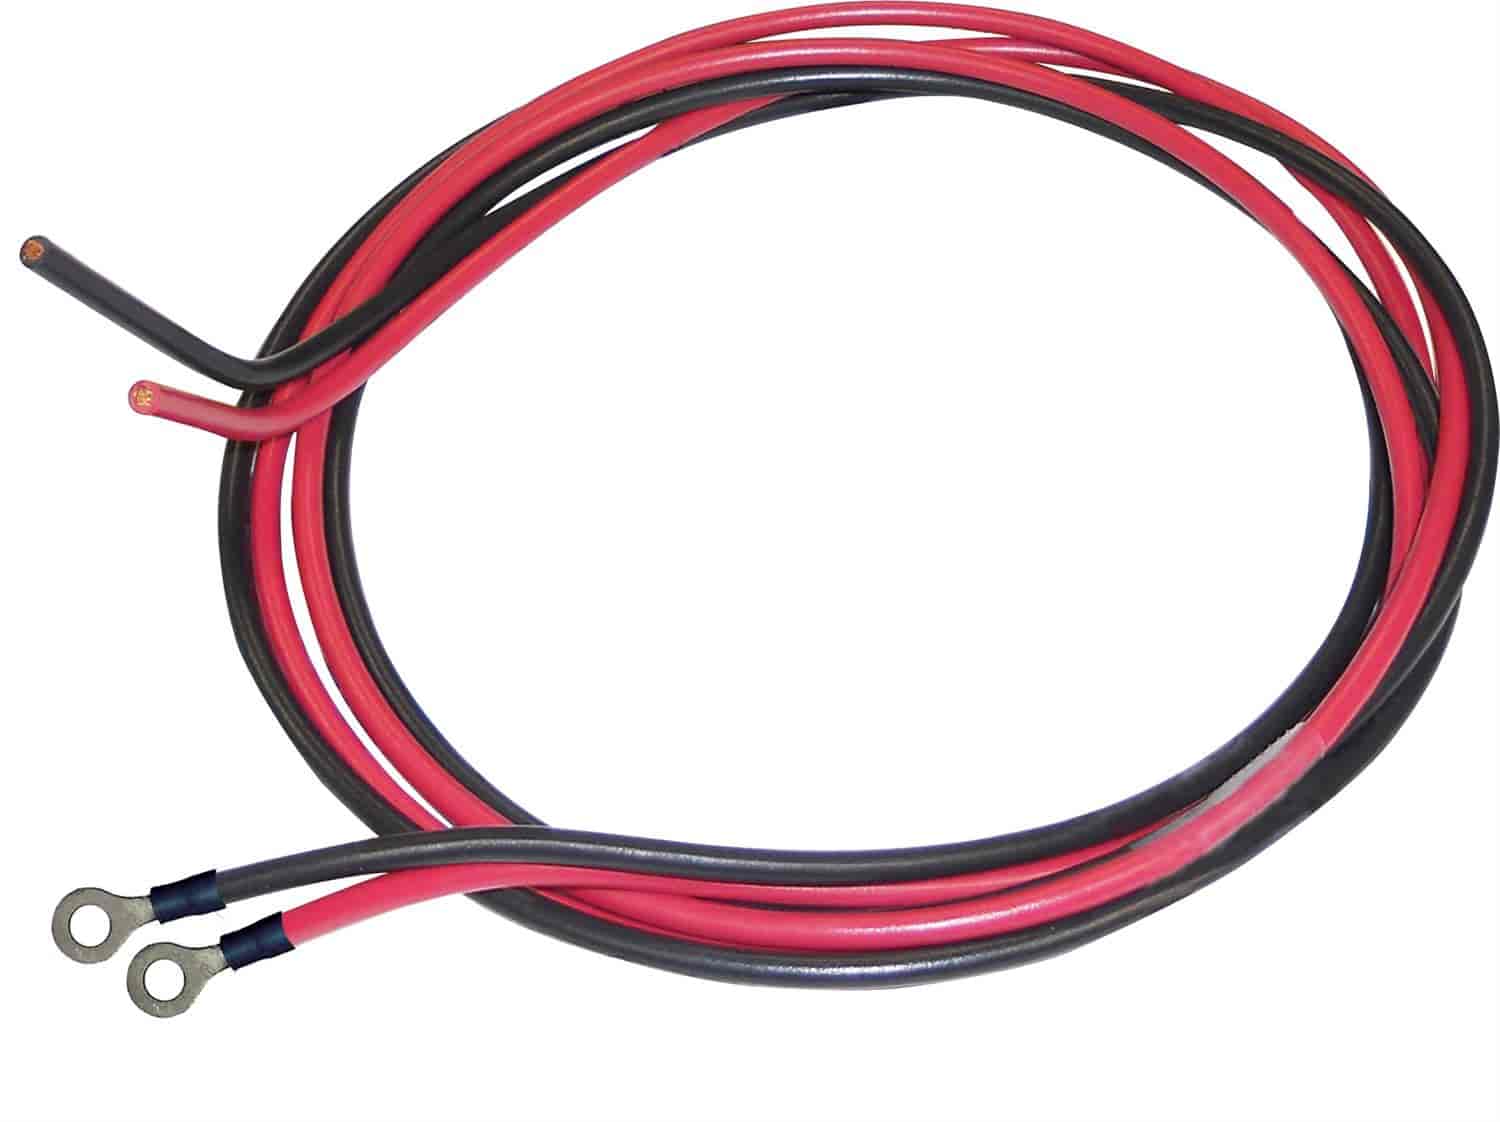 WIRE HARNESS FOR PUMPS